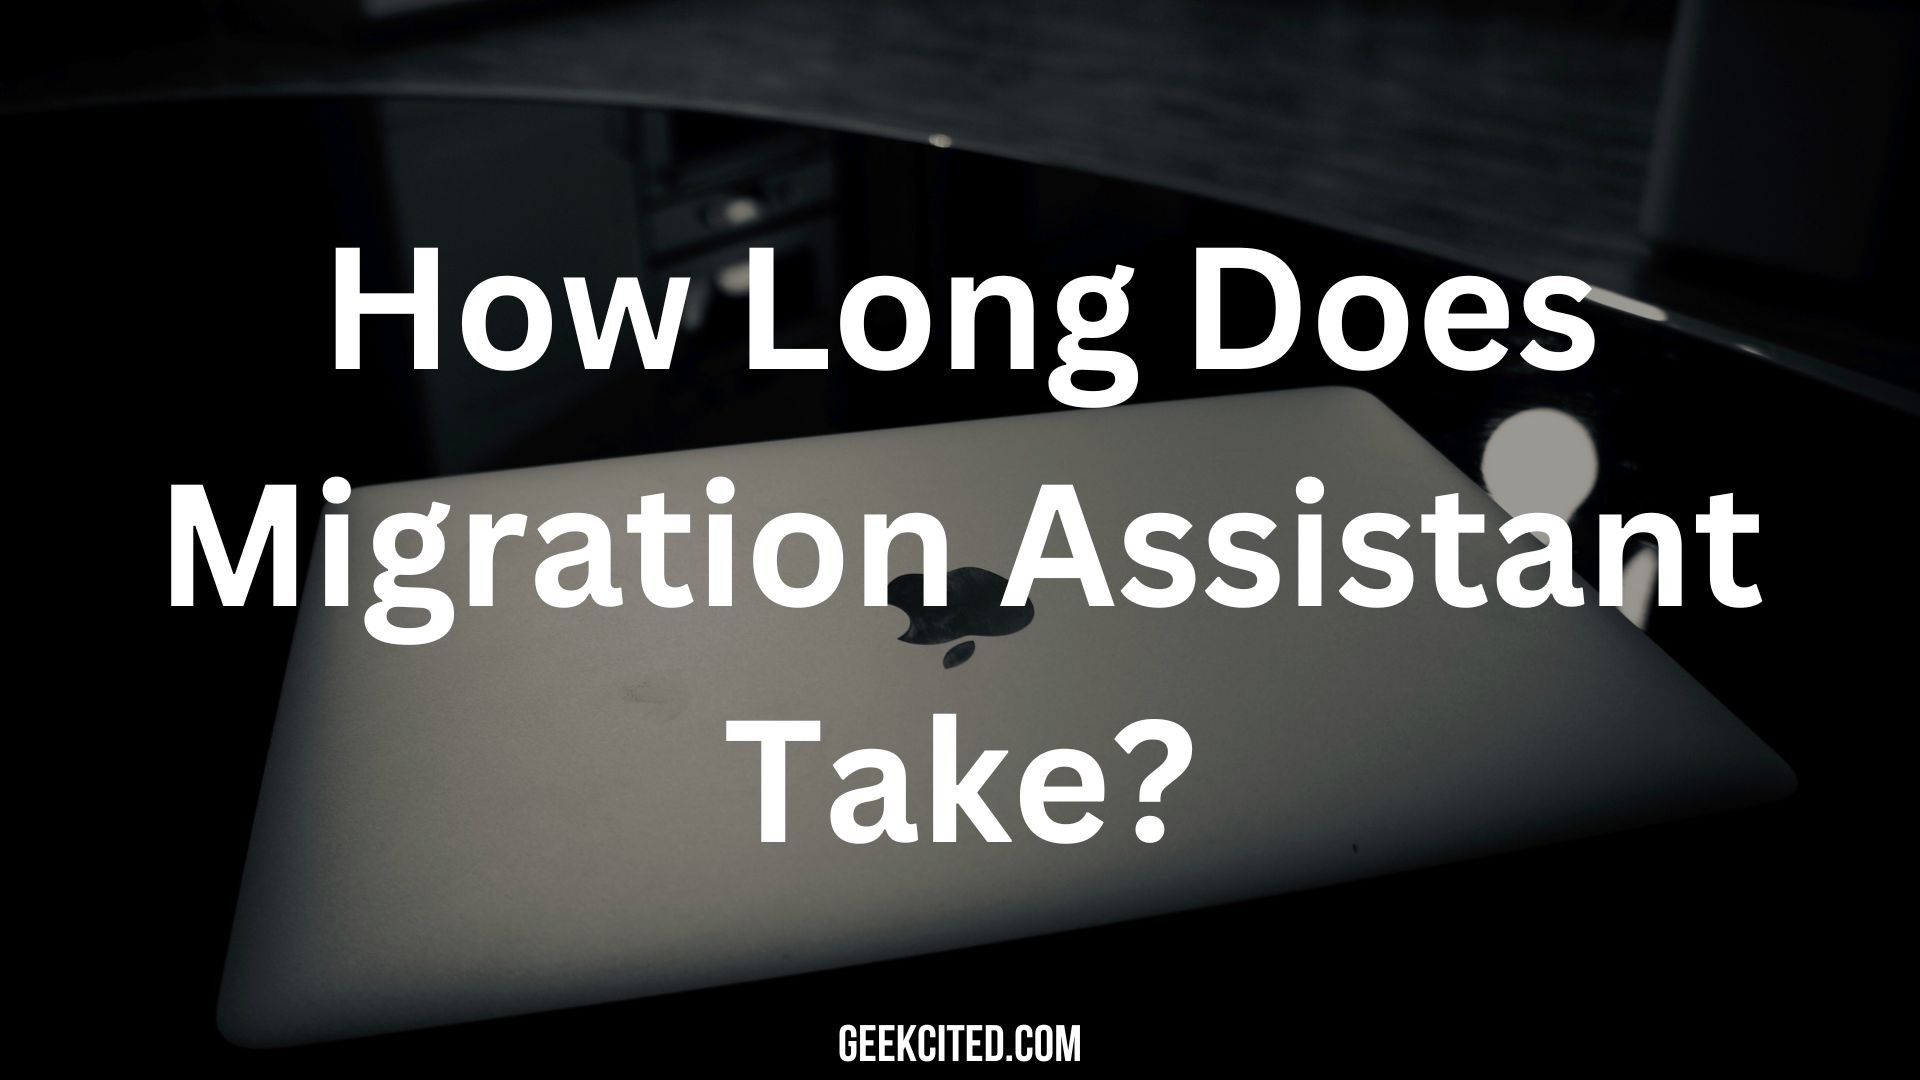 How Long Does Migration Assistant Take